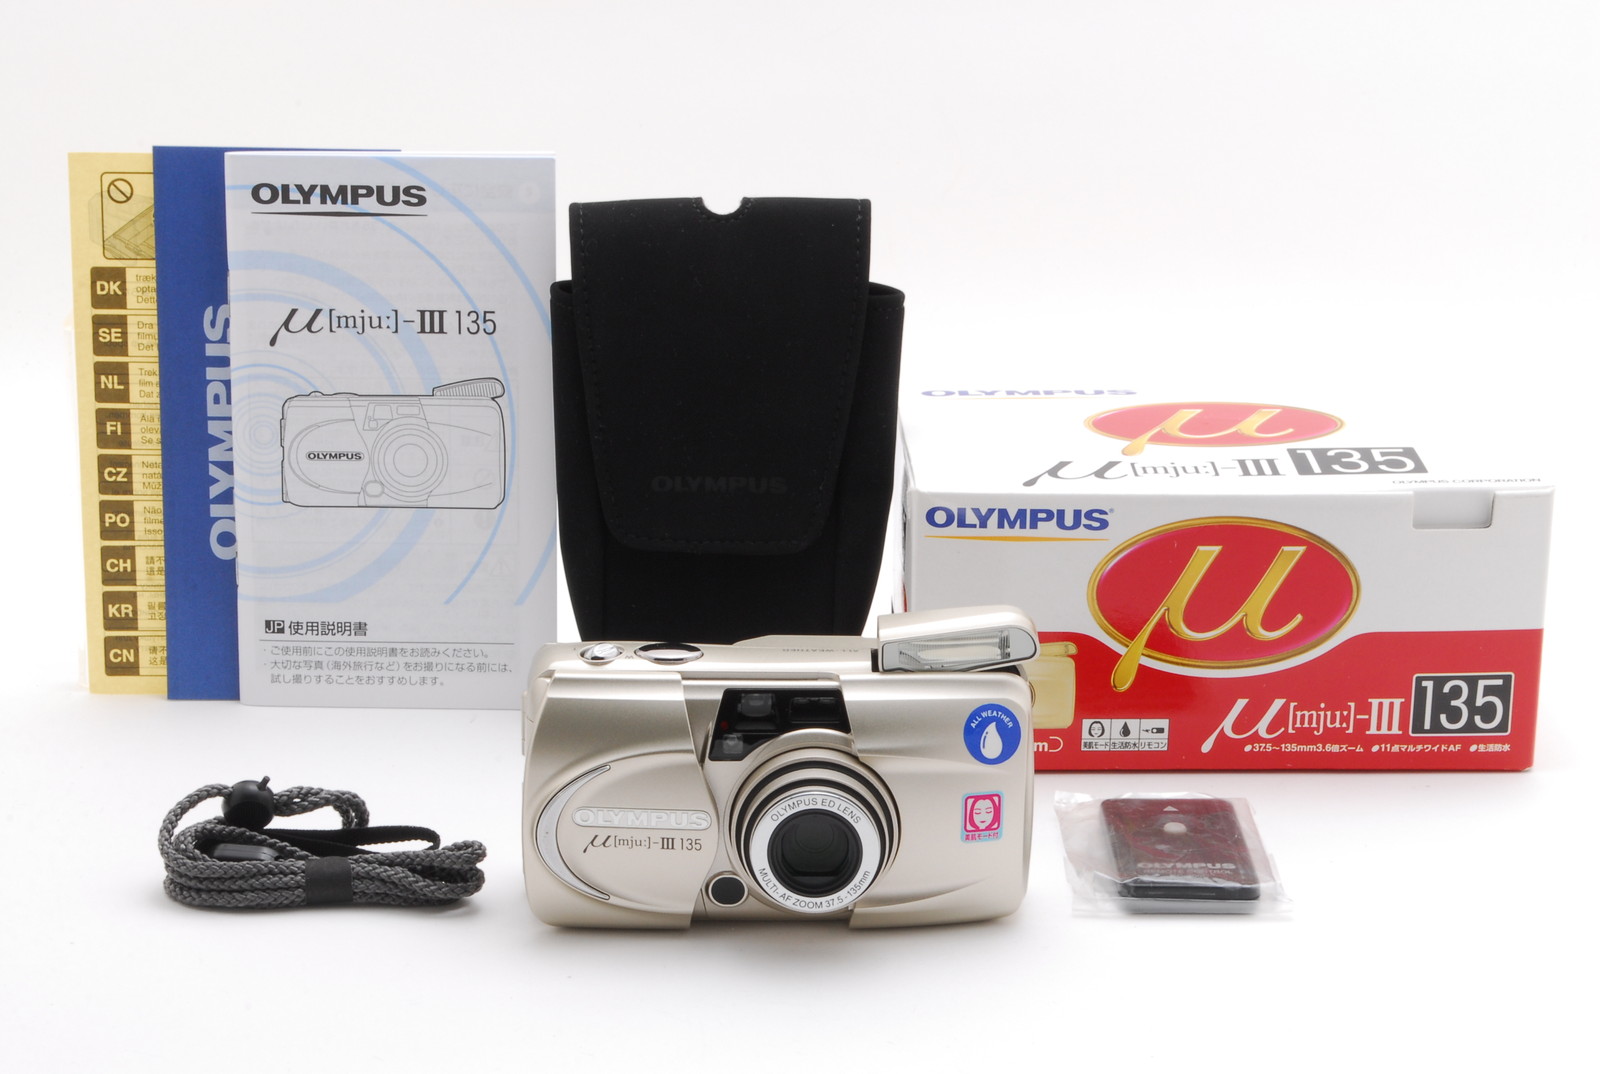 PROMOTION.ALMOST UNUSED Olympus 135, Box, Manual, RC-300C, Strap, Case from Japan – Japan